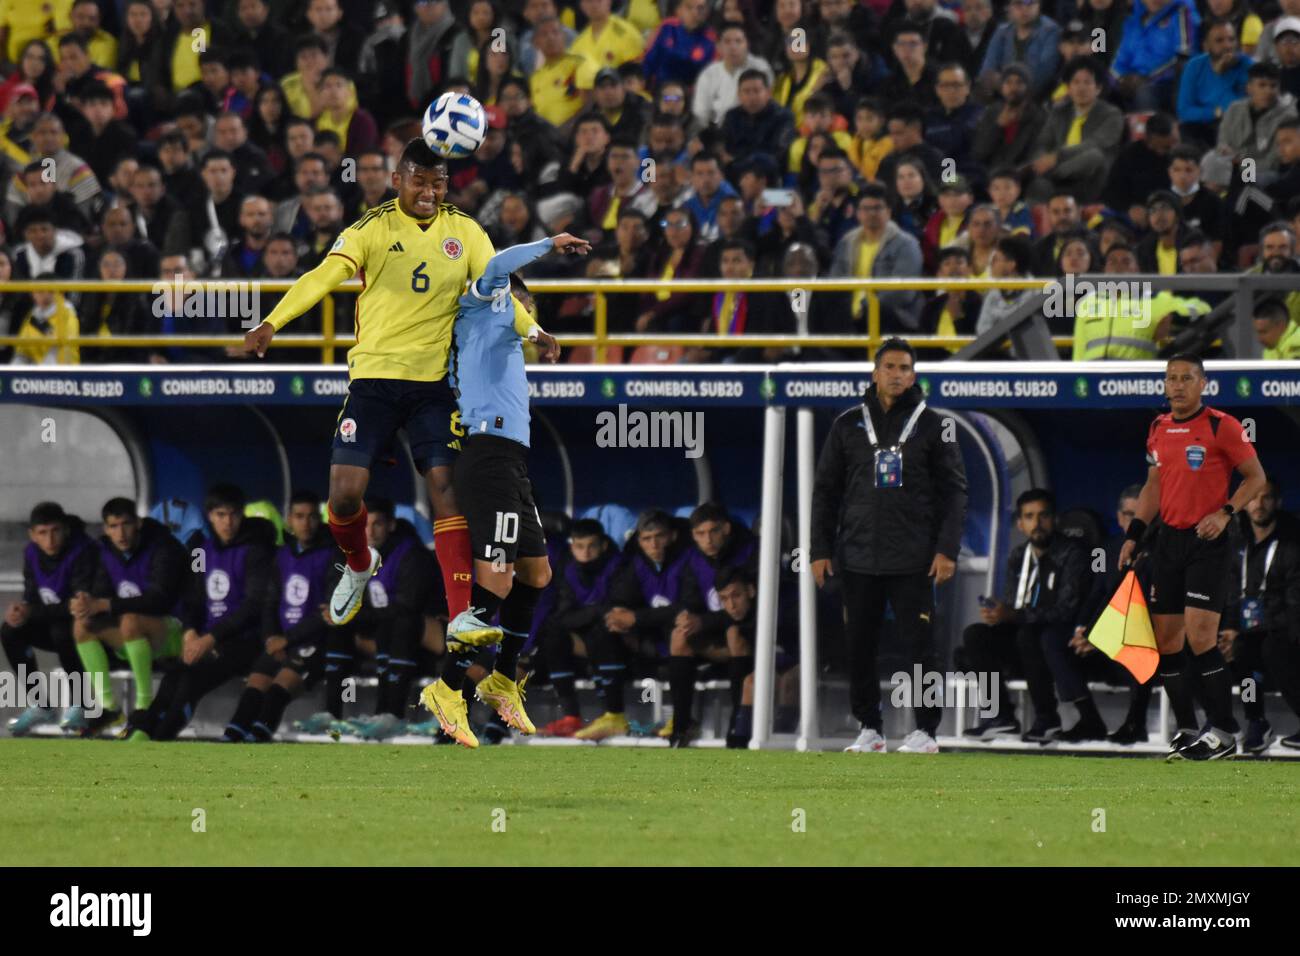 Colombia's Jhon Jaider Velez and Uruguay's Franco Gonzalez during the CONMEBOL South American Tournament match between Colombia Vs Uruguay, in Bogota, Colombia on January 31, 2023. Photo by: Cristian Bayona/Long Visual Press Stock Photo